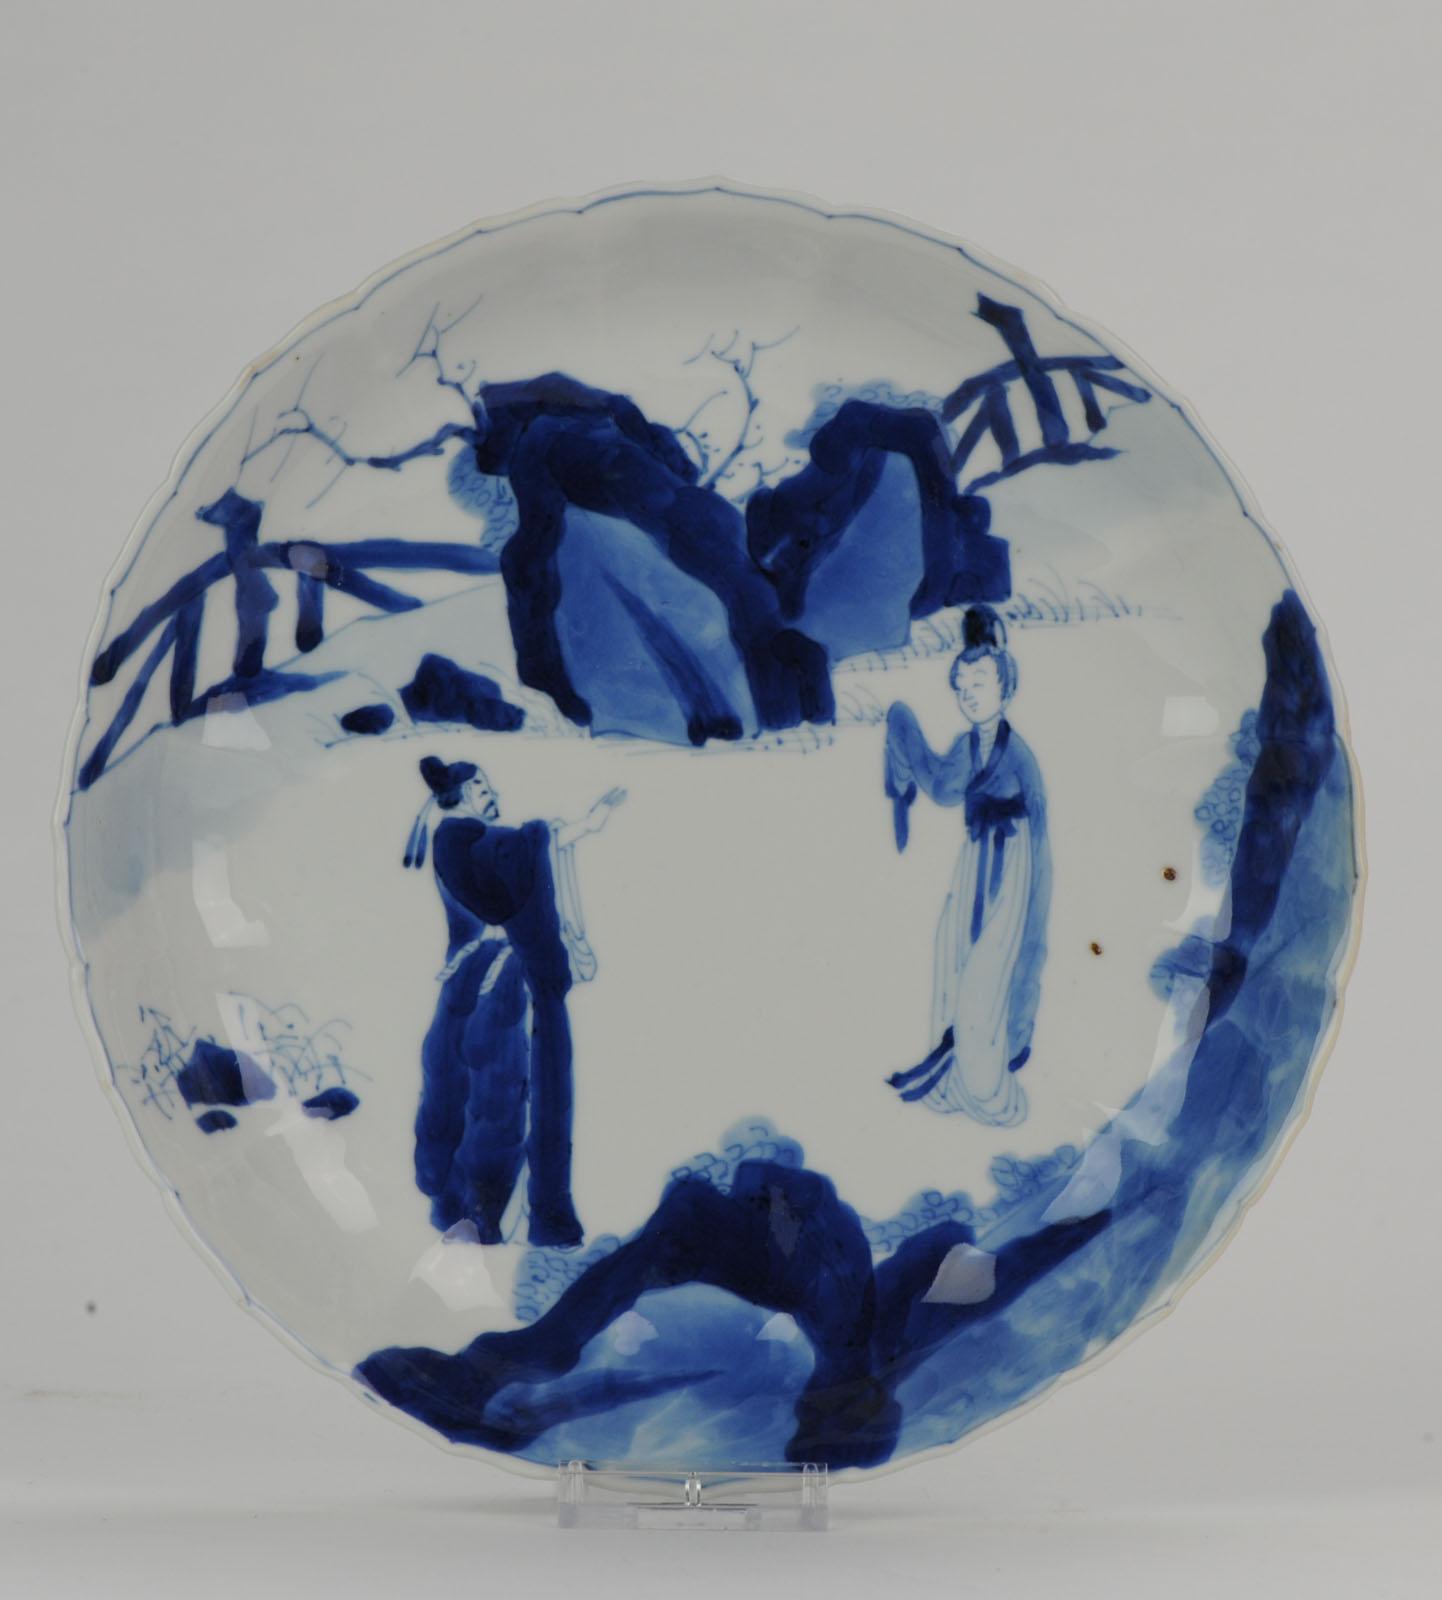 A very nicely decorated plate with scene of 2 figures (man and woman) in a landscape. Chinese taste and Kangxi period. Great decoration.

Marked Chenghua at the base.

7-5-19-15-8

 

 

 

 
Condition
Overall condition very good; 2